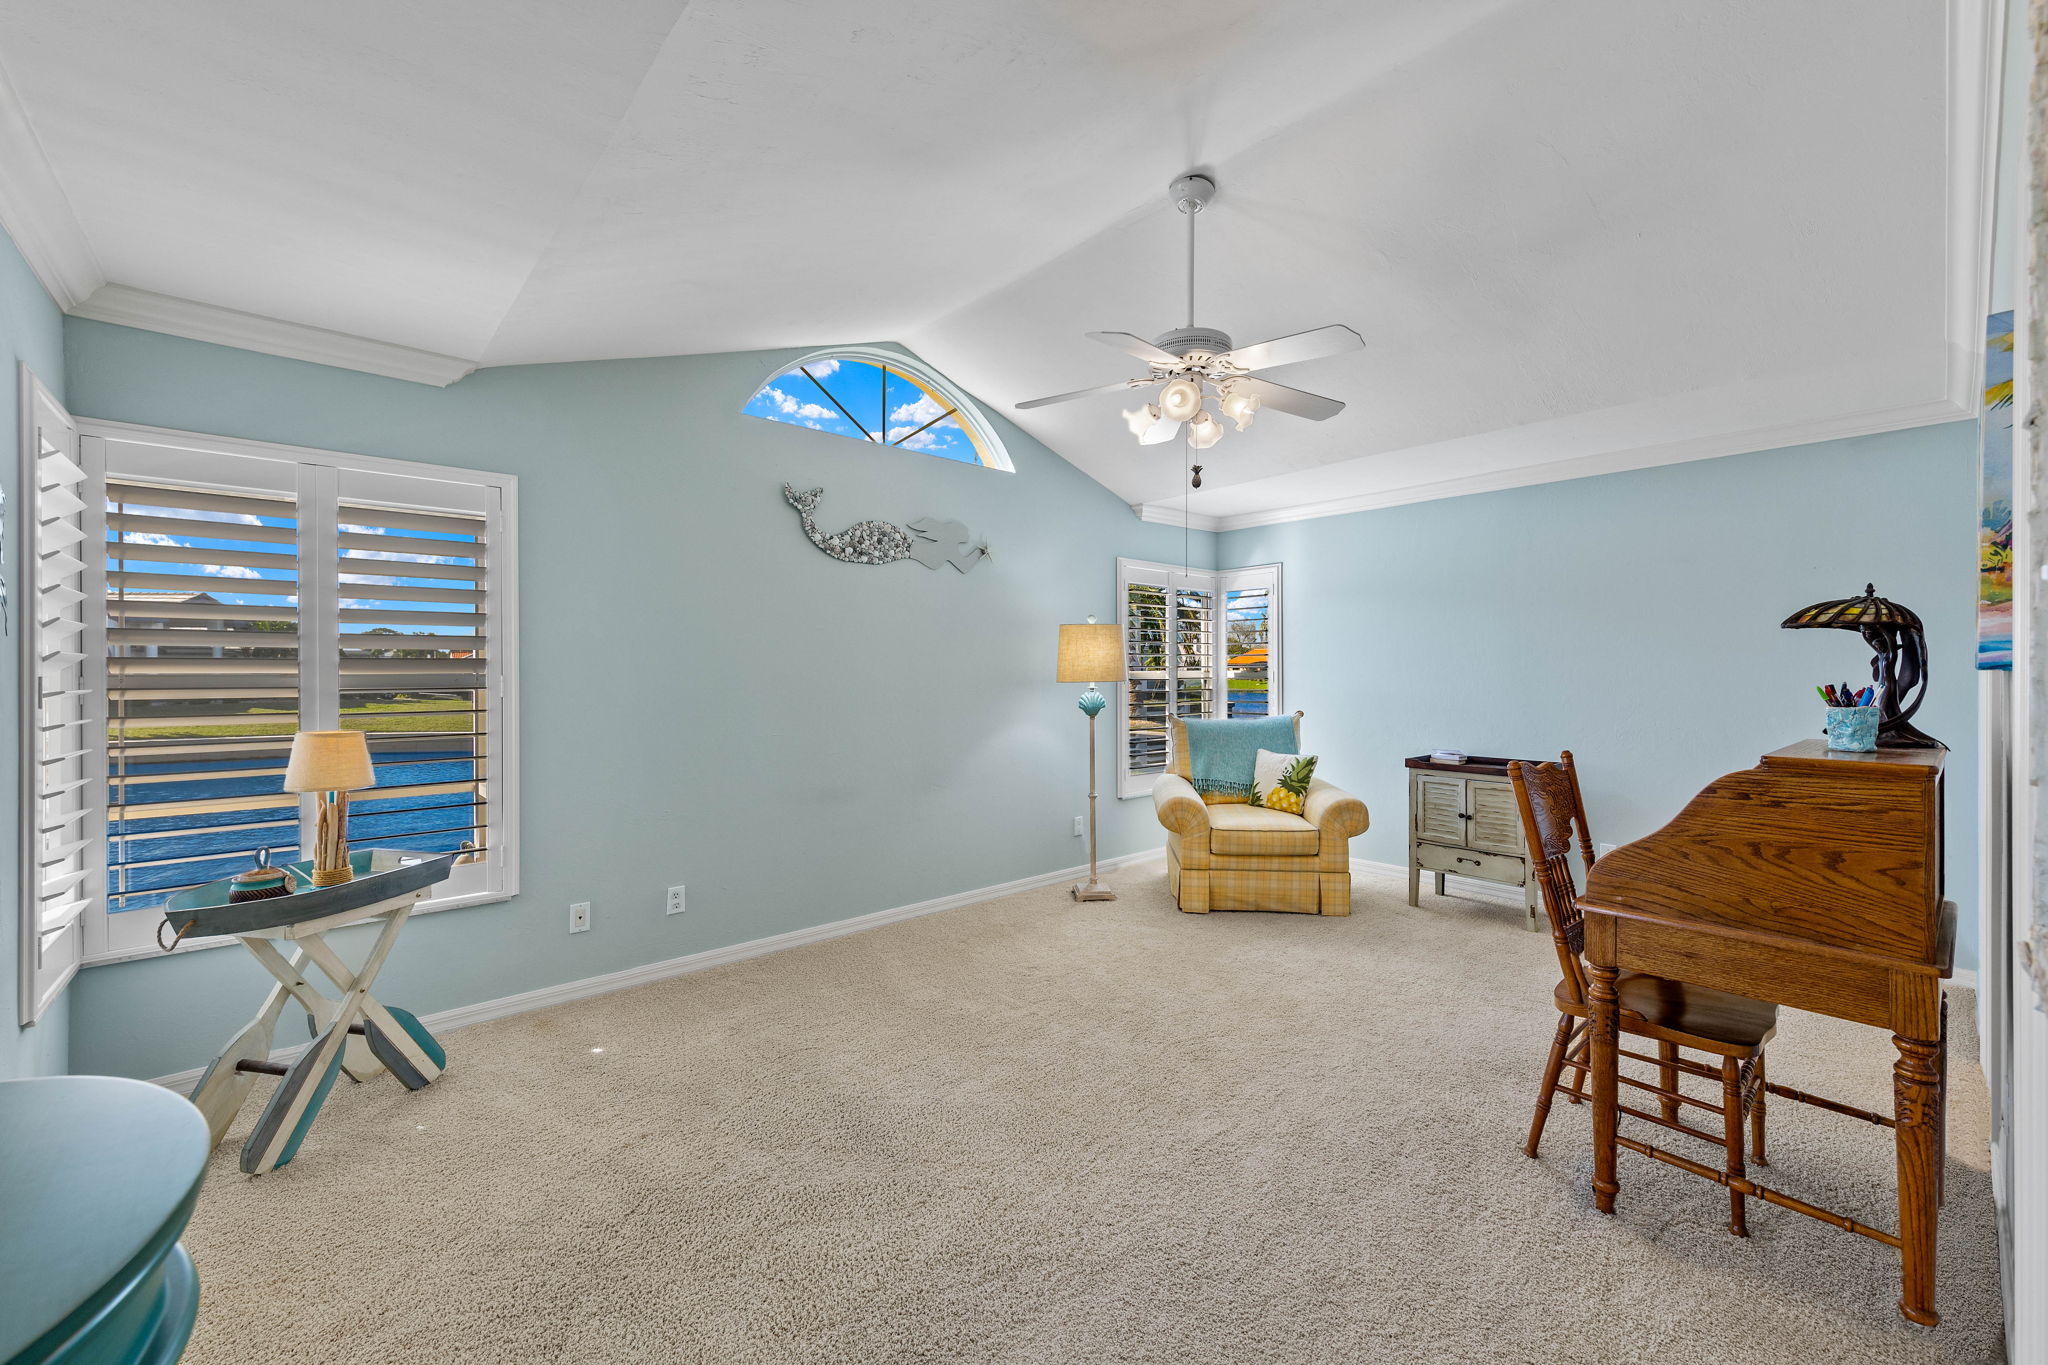 virtually staged- please remove the furniture that is in the room-Same beach theme as house